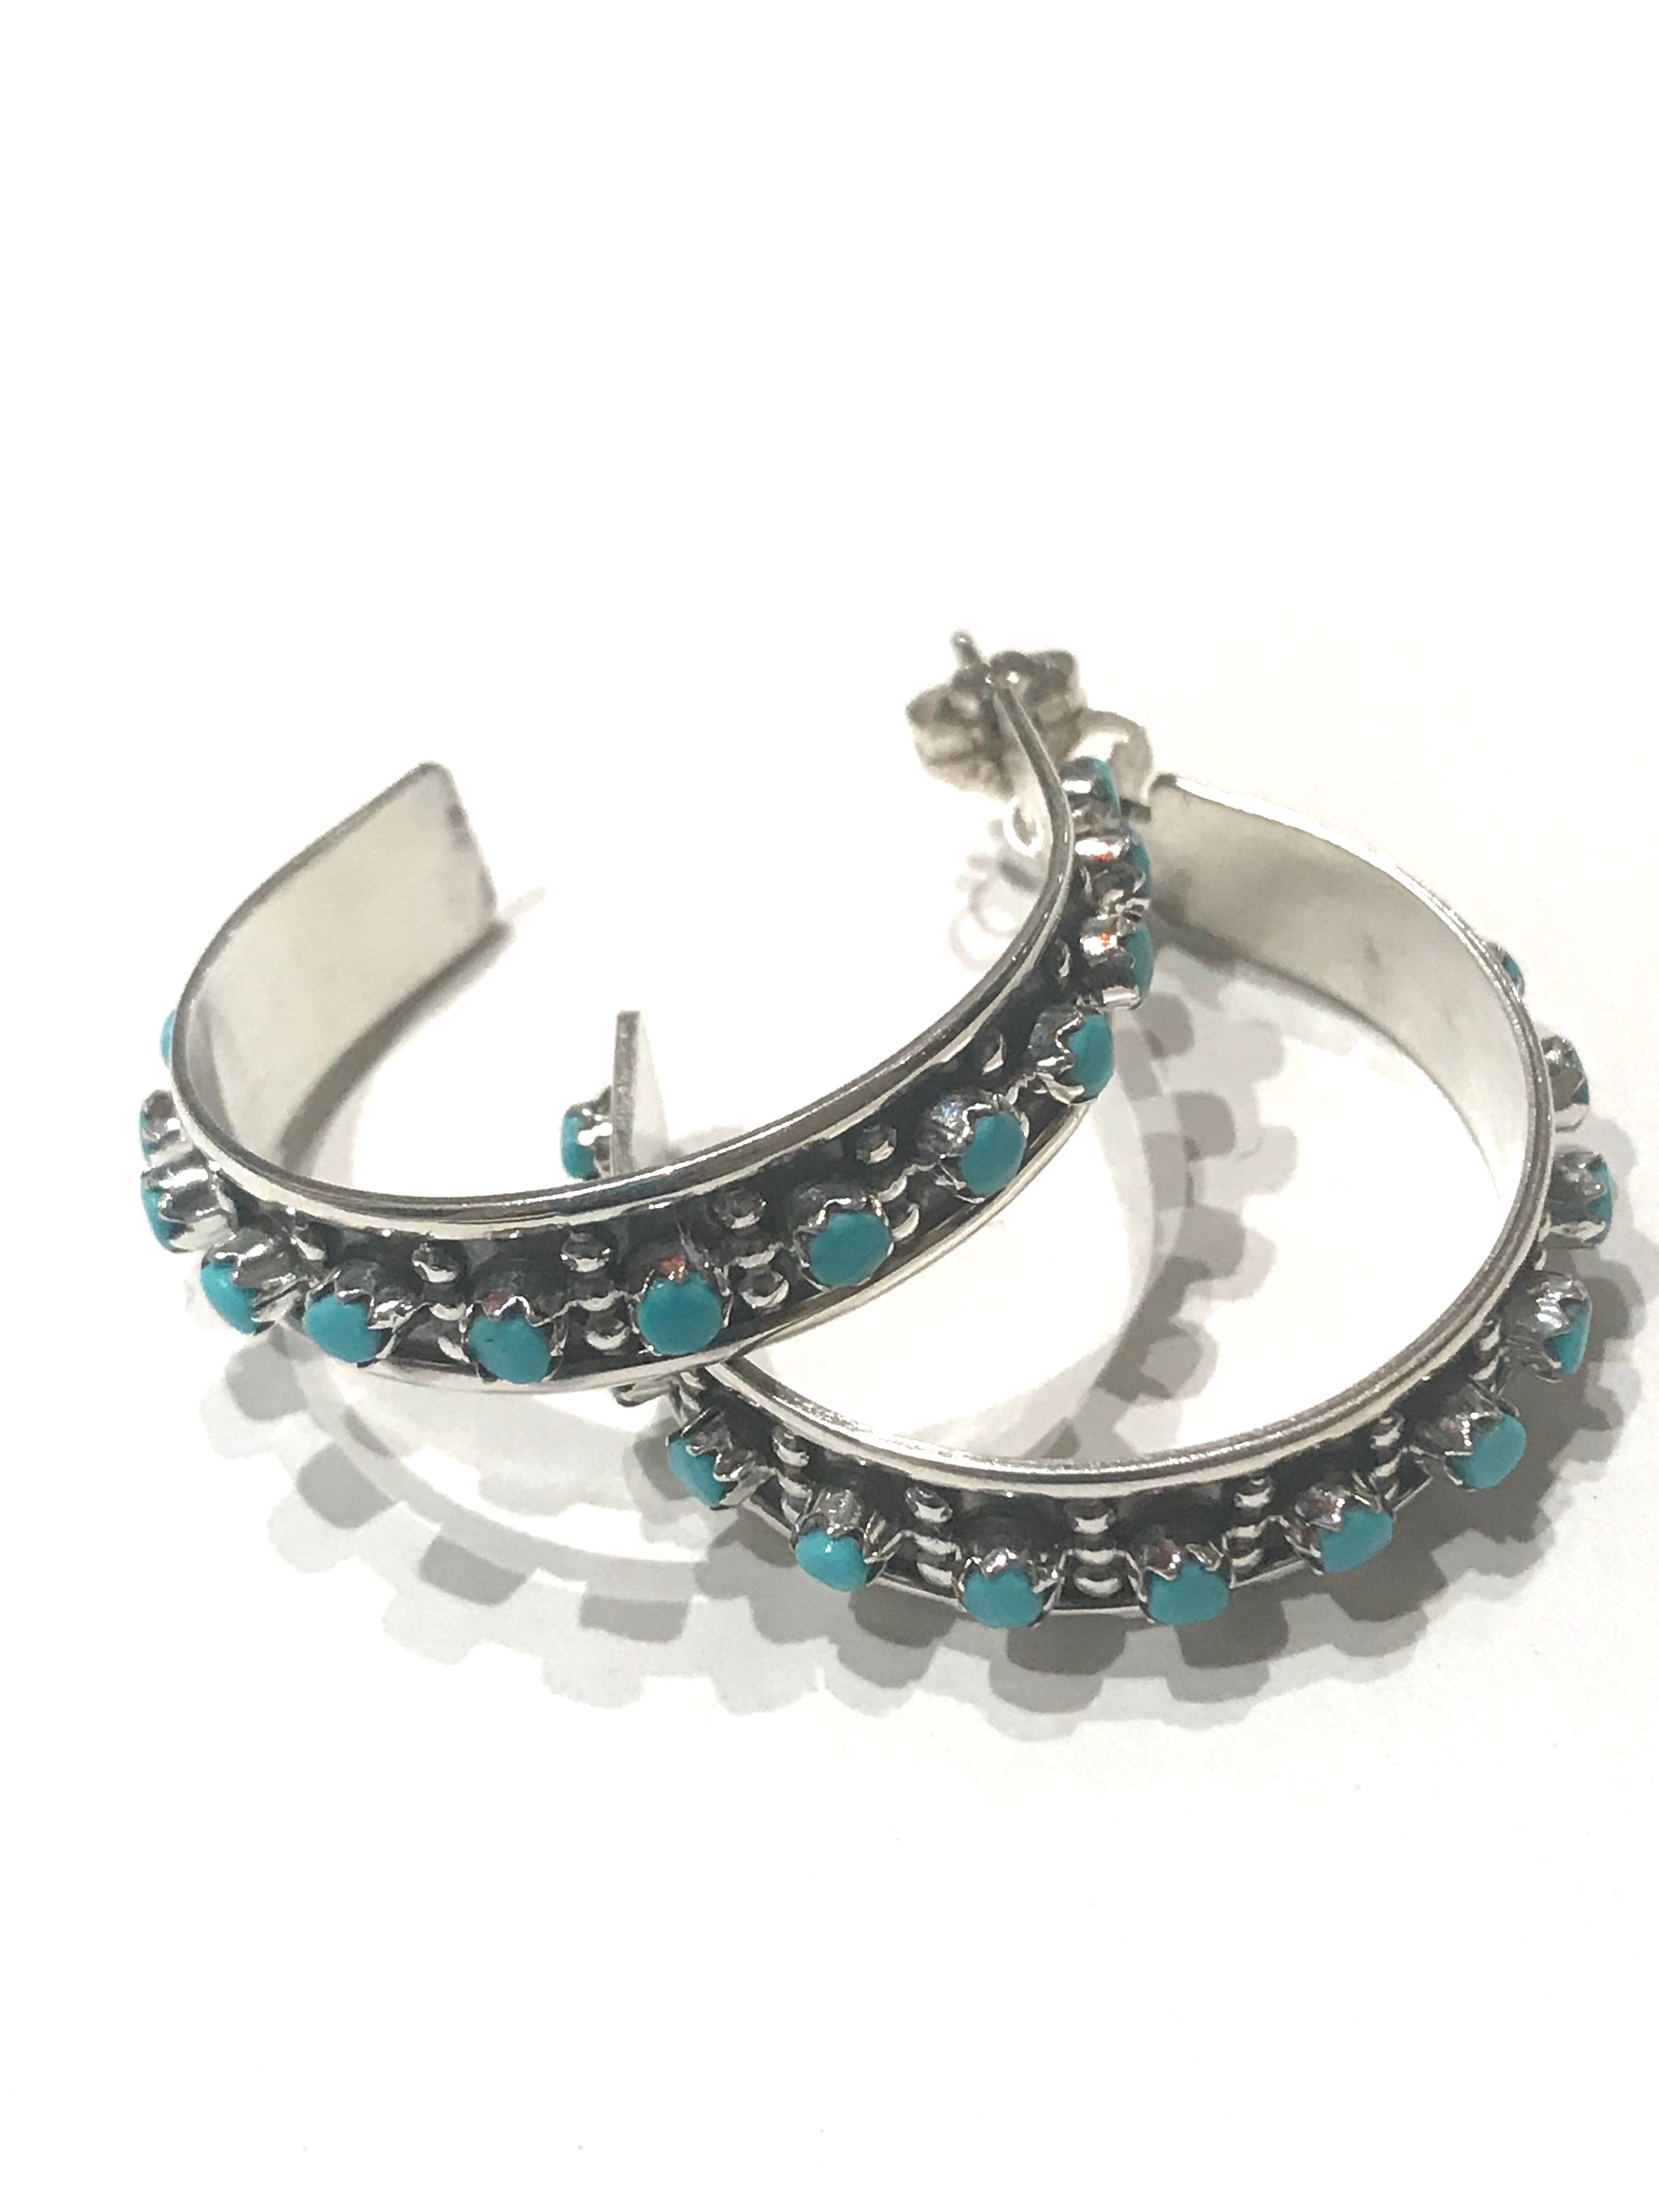 Turquoise hoop Native Anerican Indian made